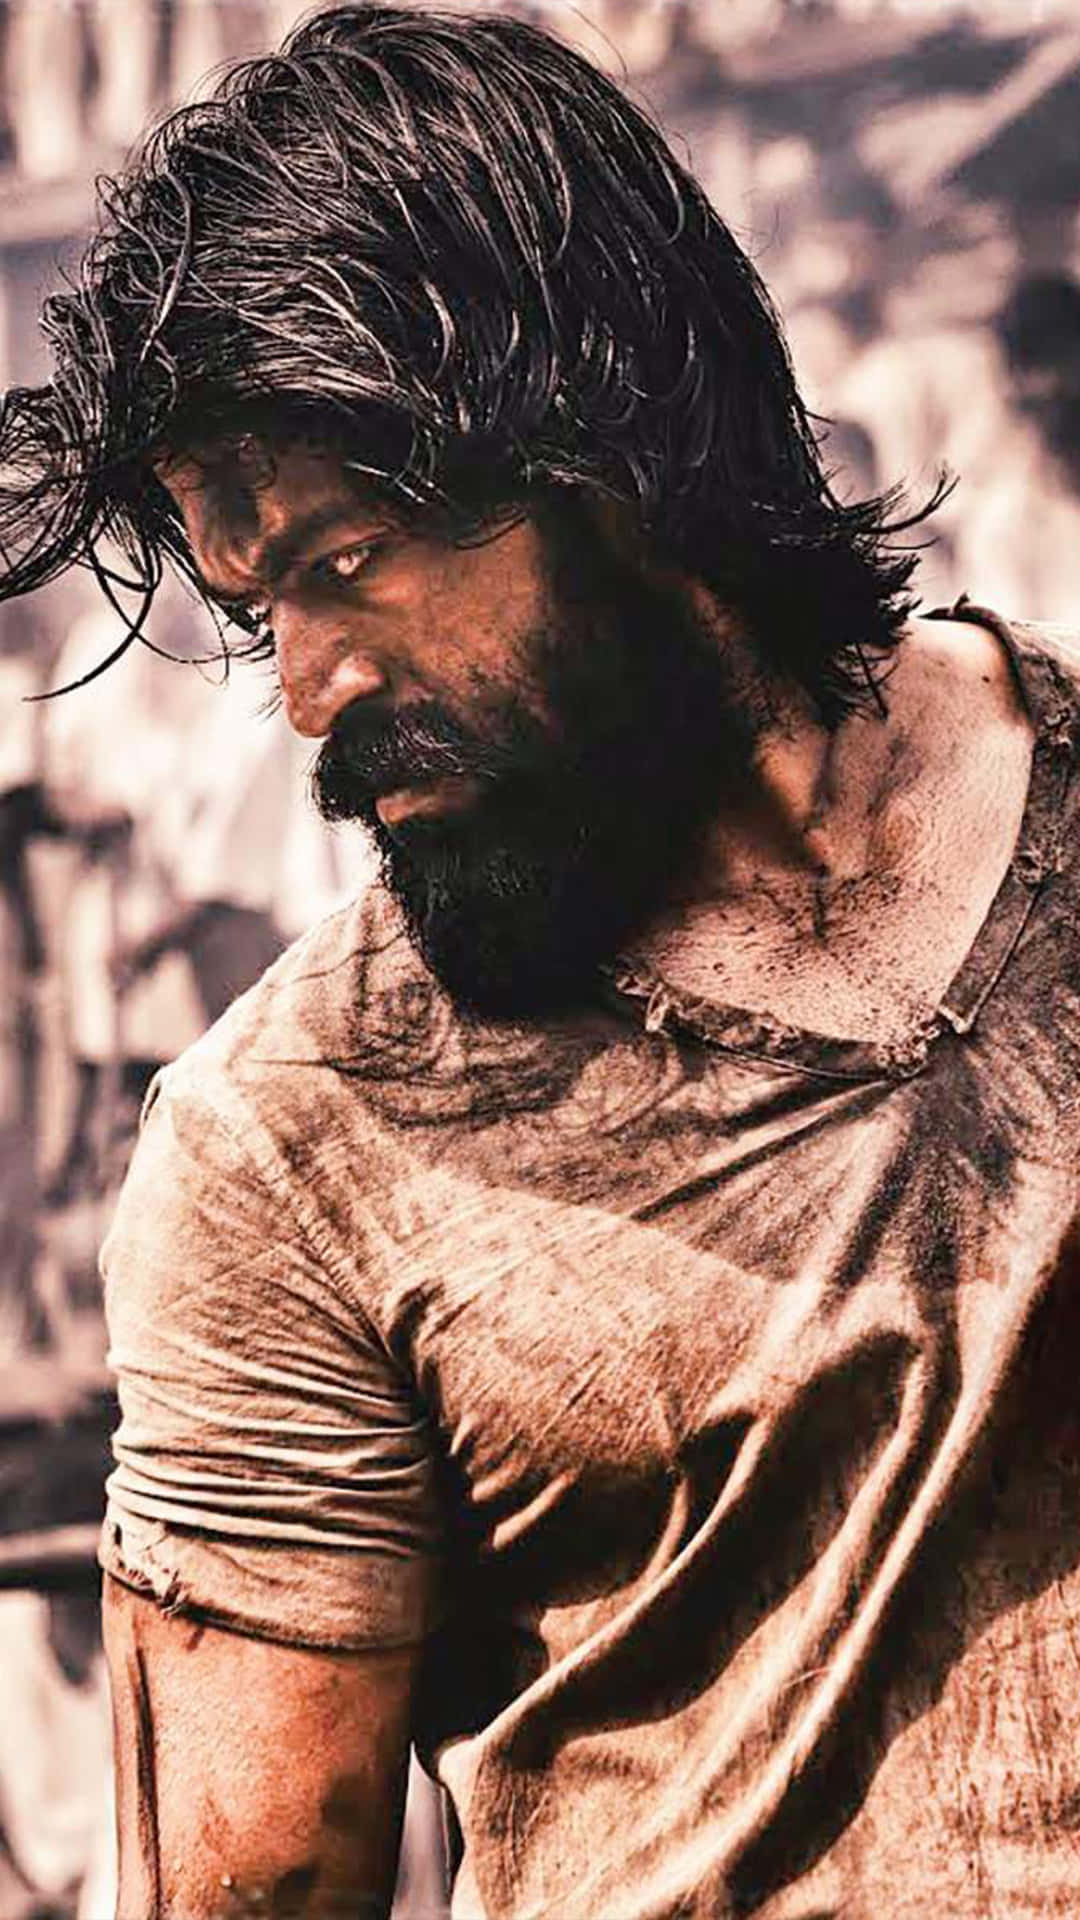 Intense Gaze from KGF Chapter 2 Star, Yash, in a Captivating Scene